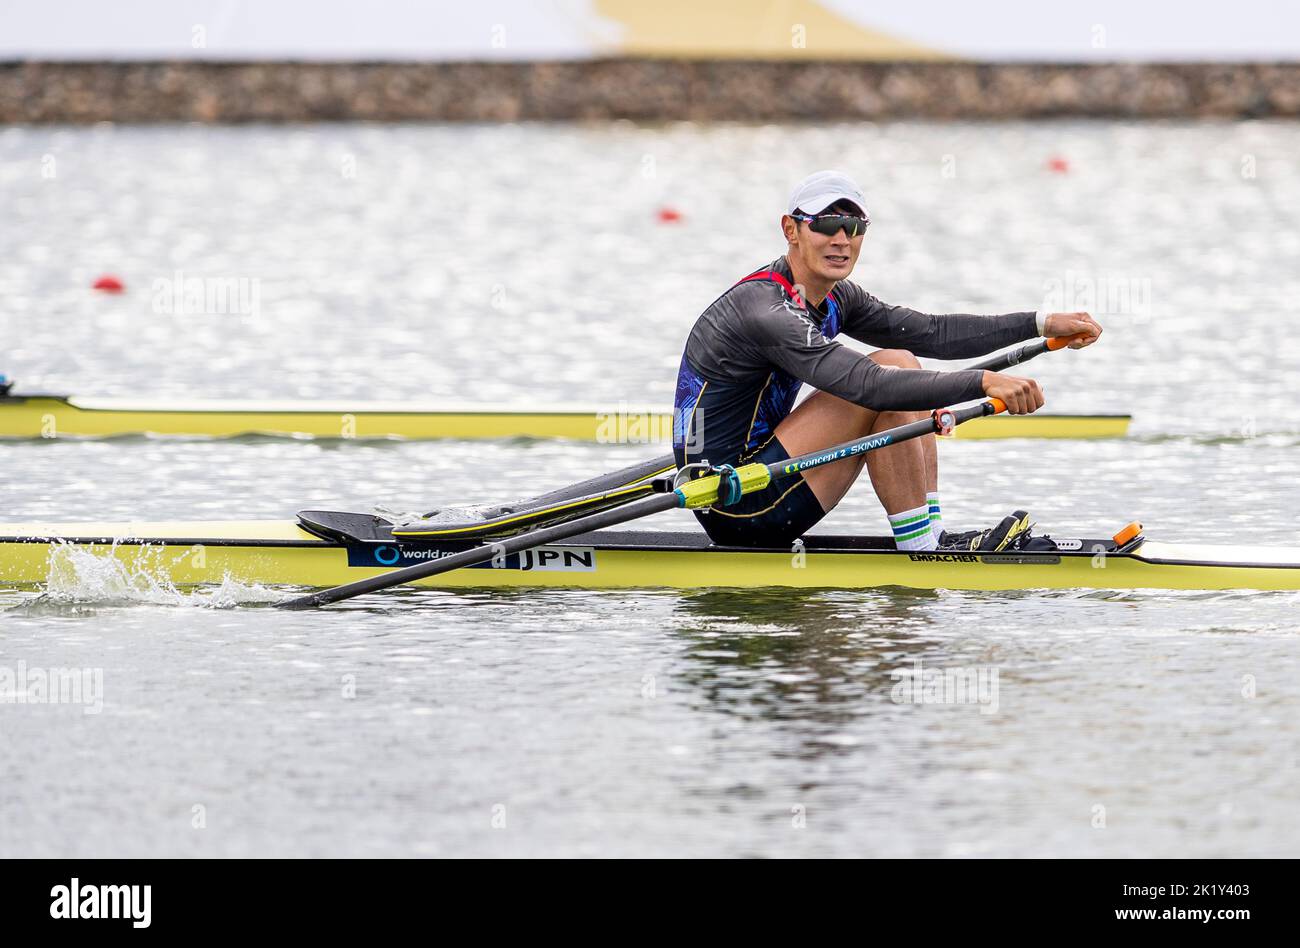 Racice, Czech Republic. 21st Sep, 2022. Rjuta Arakawa of Japan competing during Day 4 of the 2022 World Rowing Championships at the Labe Arena Racice on September 21, 2022 in Racice, Czech Republic. Credit: Ondrej Hajek/CTK Photo/Alamy Live News Stock Photo